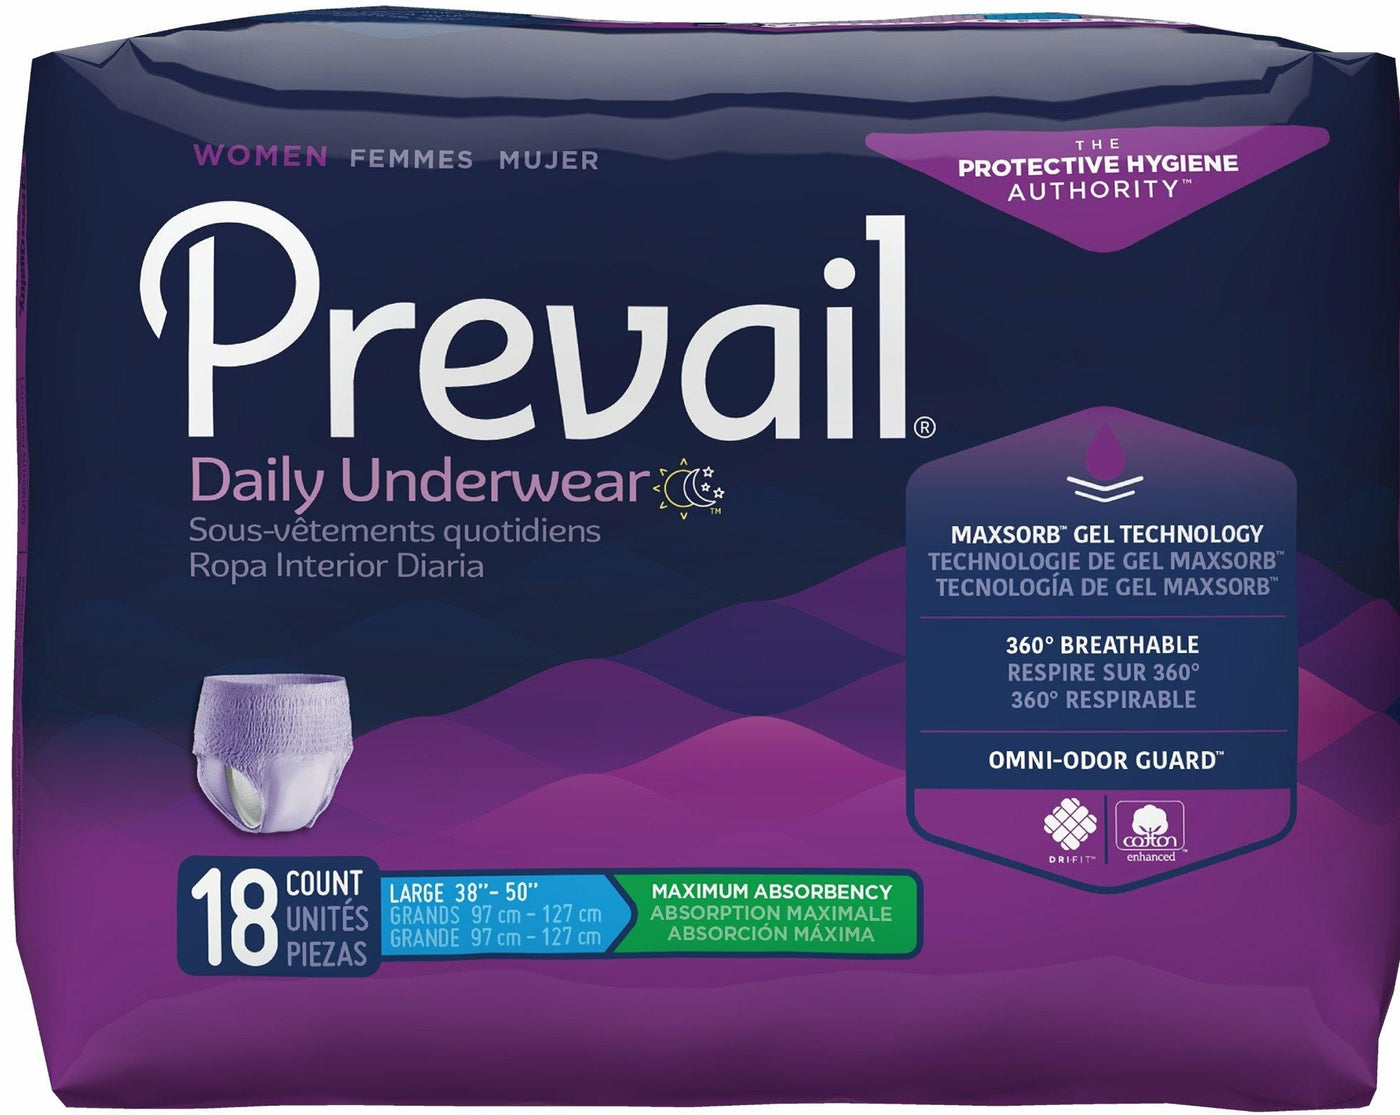 Incontinence underwear disposable